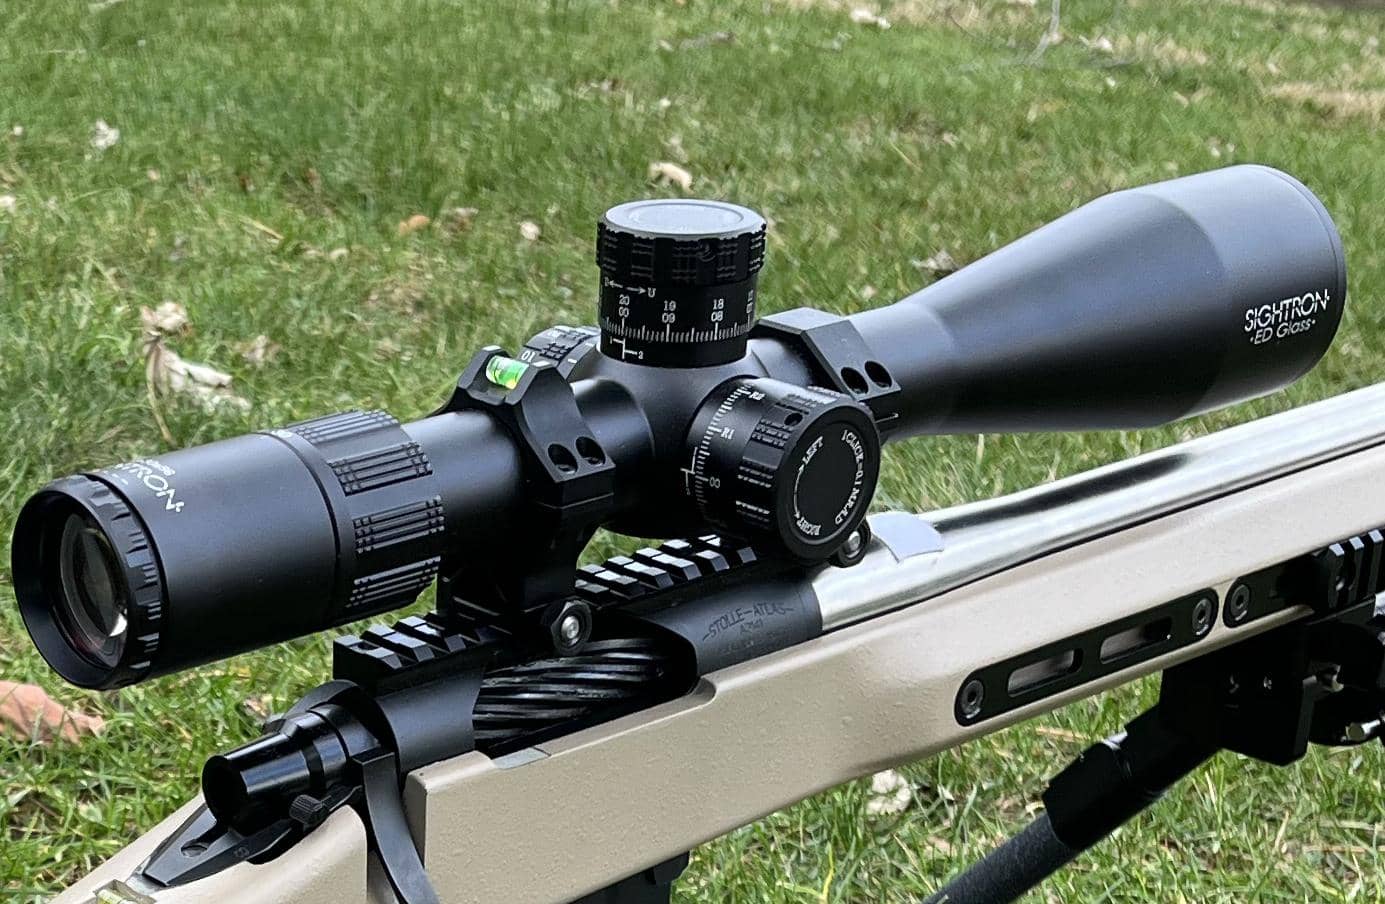 Hawkins Precision Ultra Light Tactical Scope rings on a Sightron S6 5-30x56 ED Scope on my Kelbly’s Atlas rifle